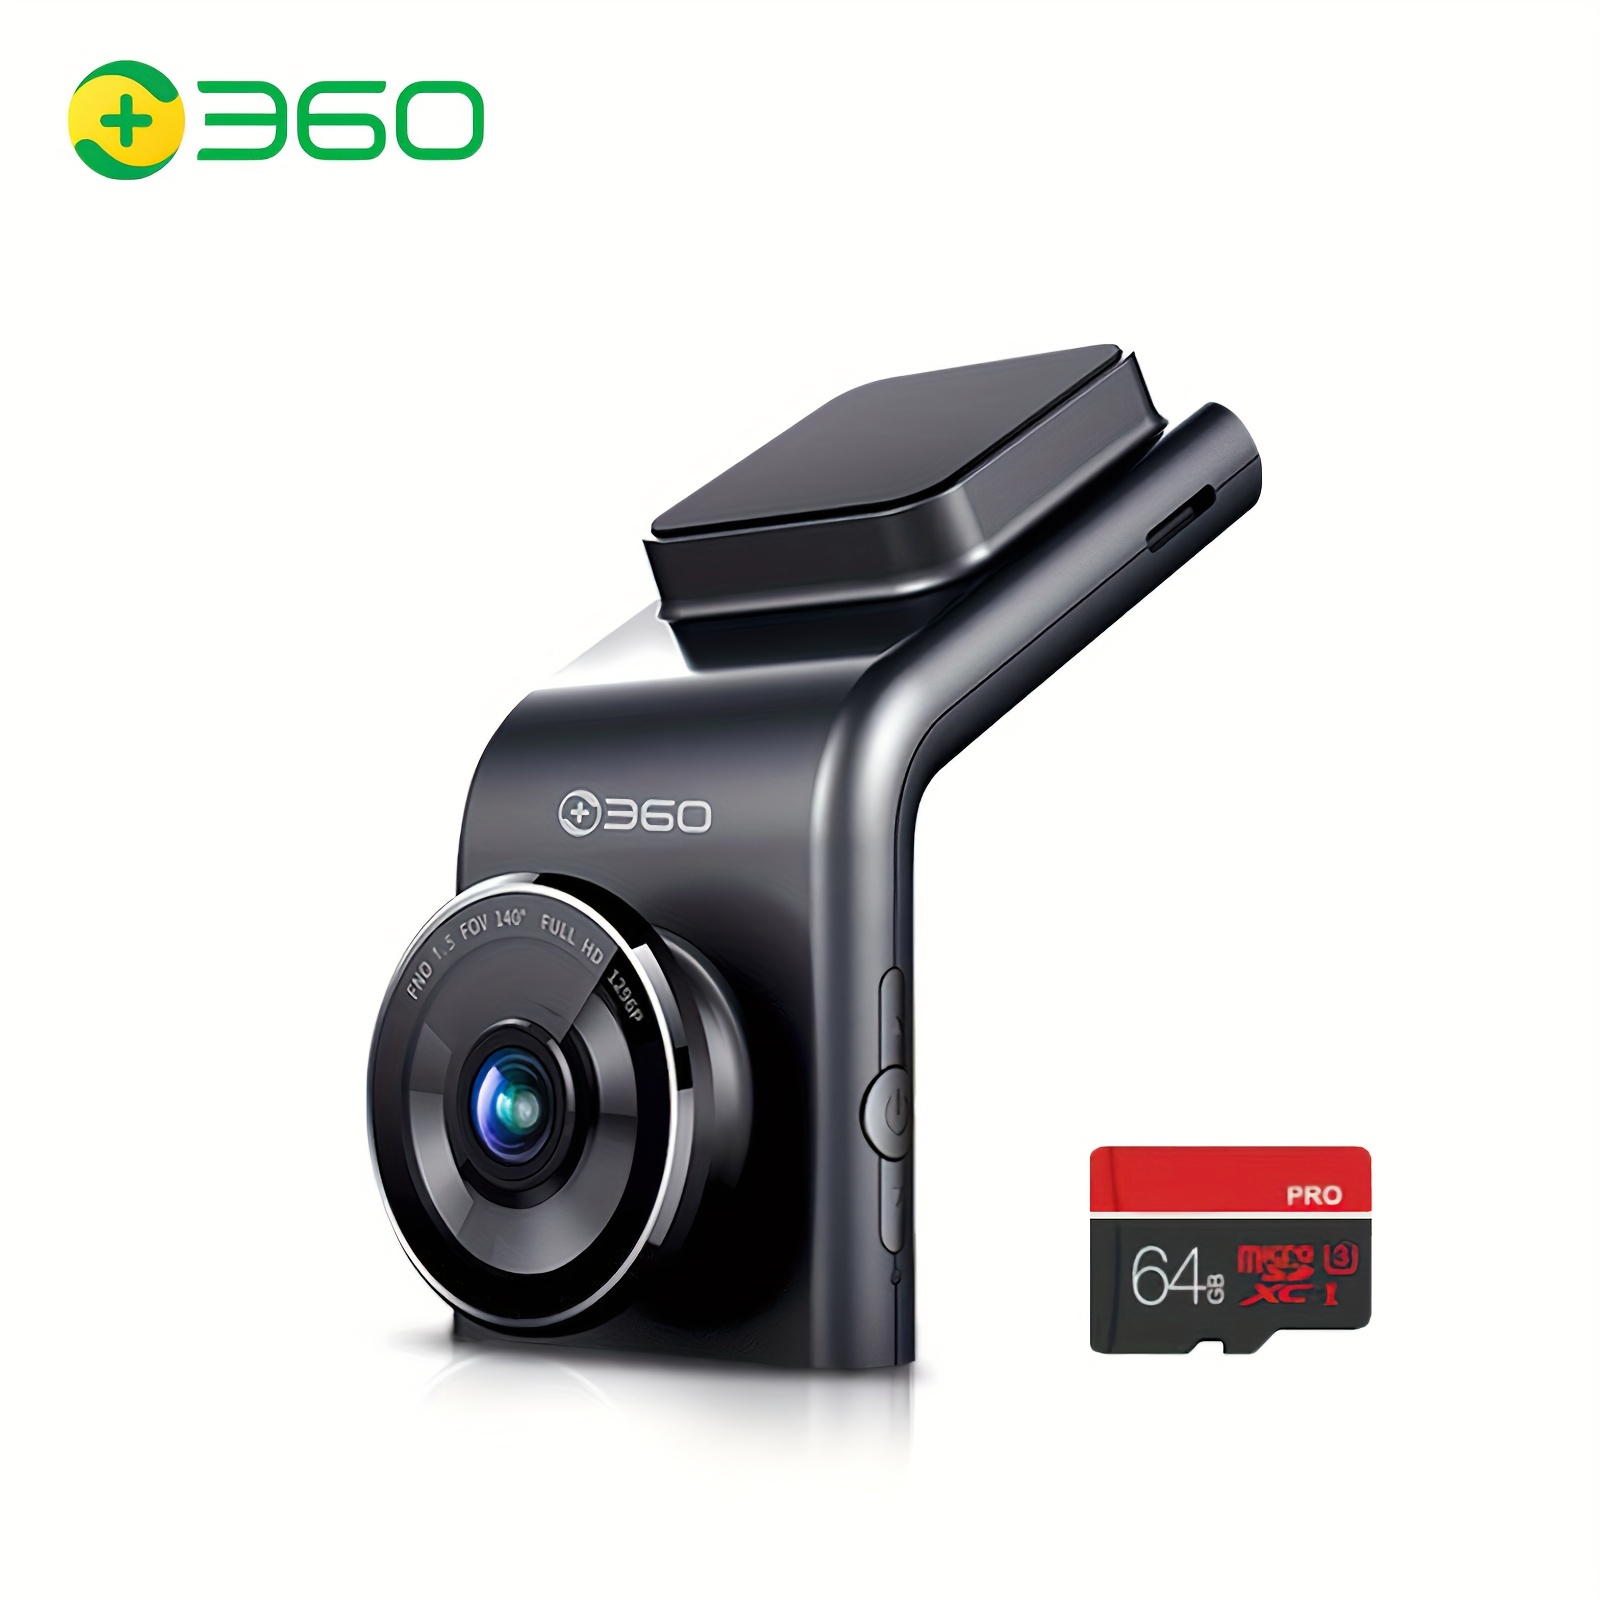  360 Dash Cam, 1296P FHD Car DashCam, 160° Wide Angle Car Camera,  Color Night Vision, Built in WiFi GPS, Support Google Map, 24hr Motion  Detection Parking Mode, Loop Recording(SD Card Not